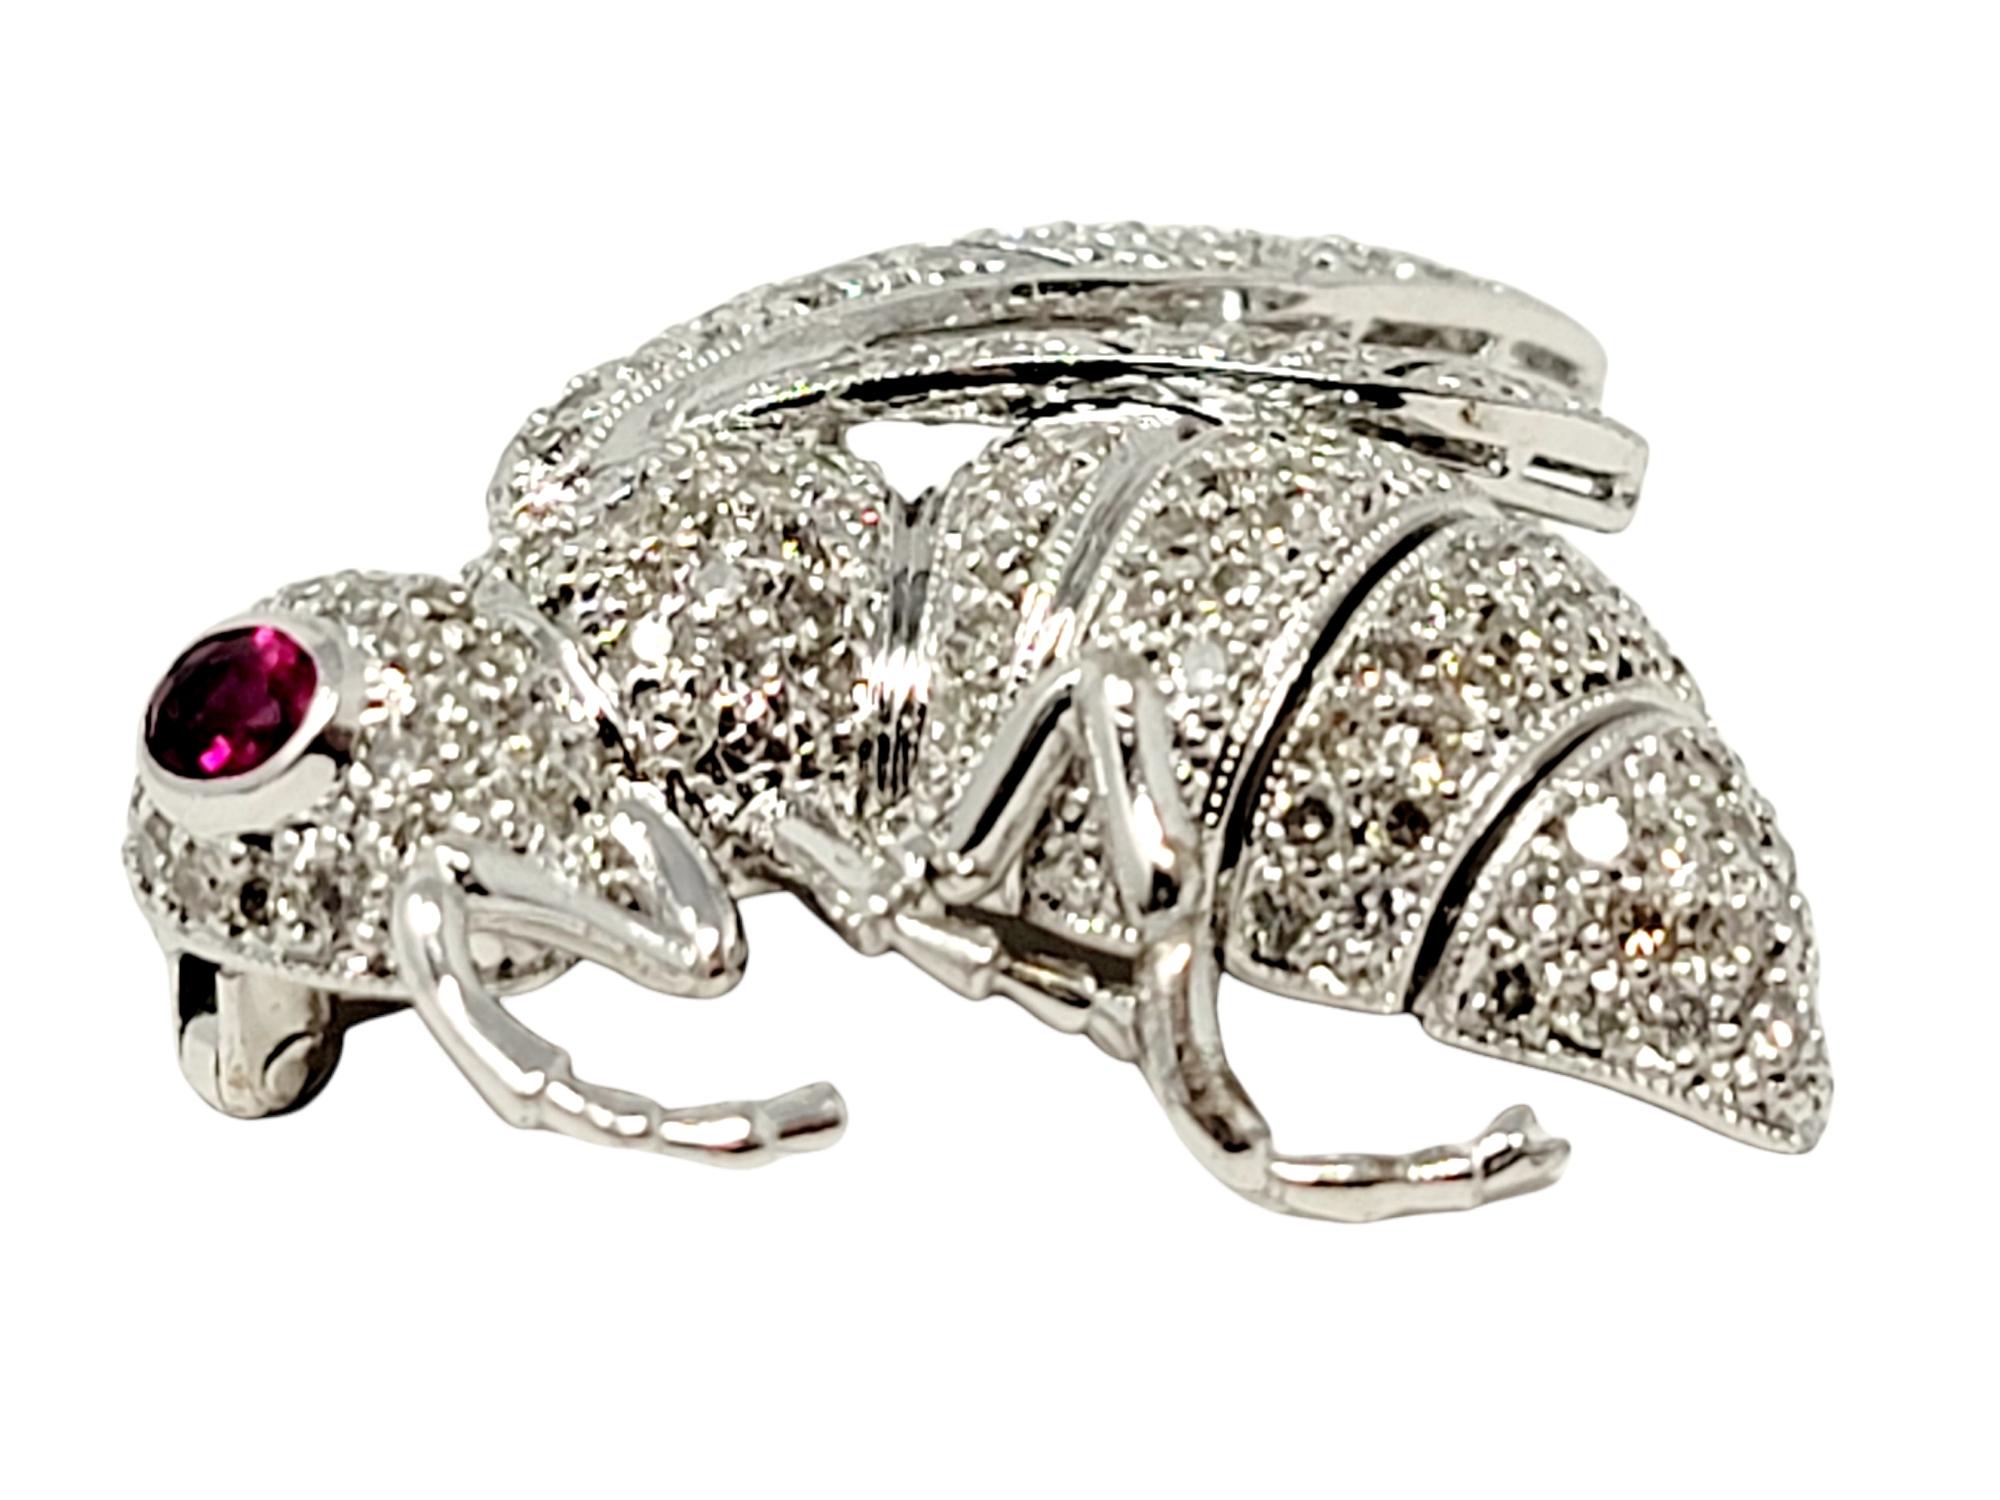 2.13 Carat Total Pave Diamond and Ruby Insect Bee Brooch 18 Karat White Gold In Good Condition For Sale In Scottsdale, AZ